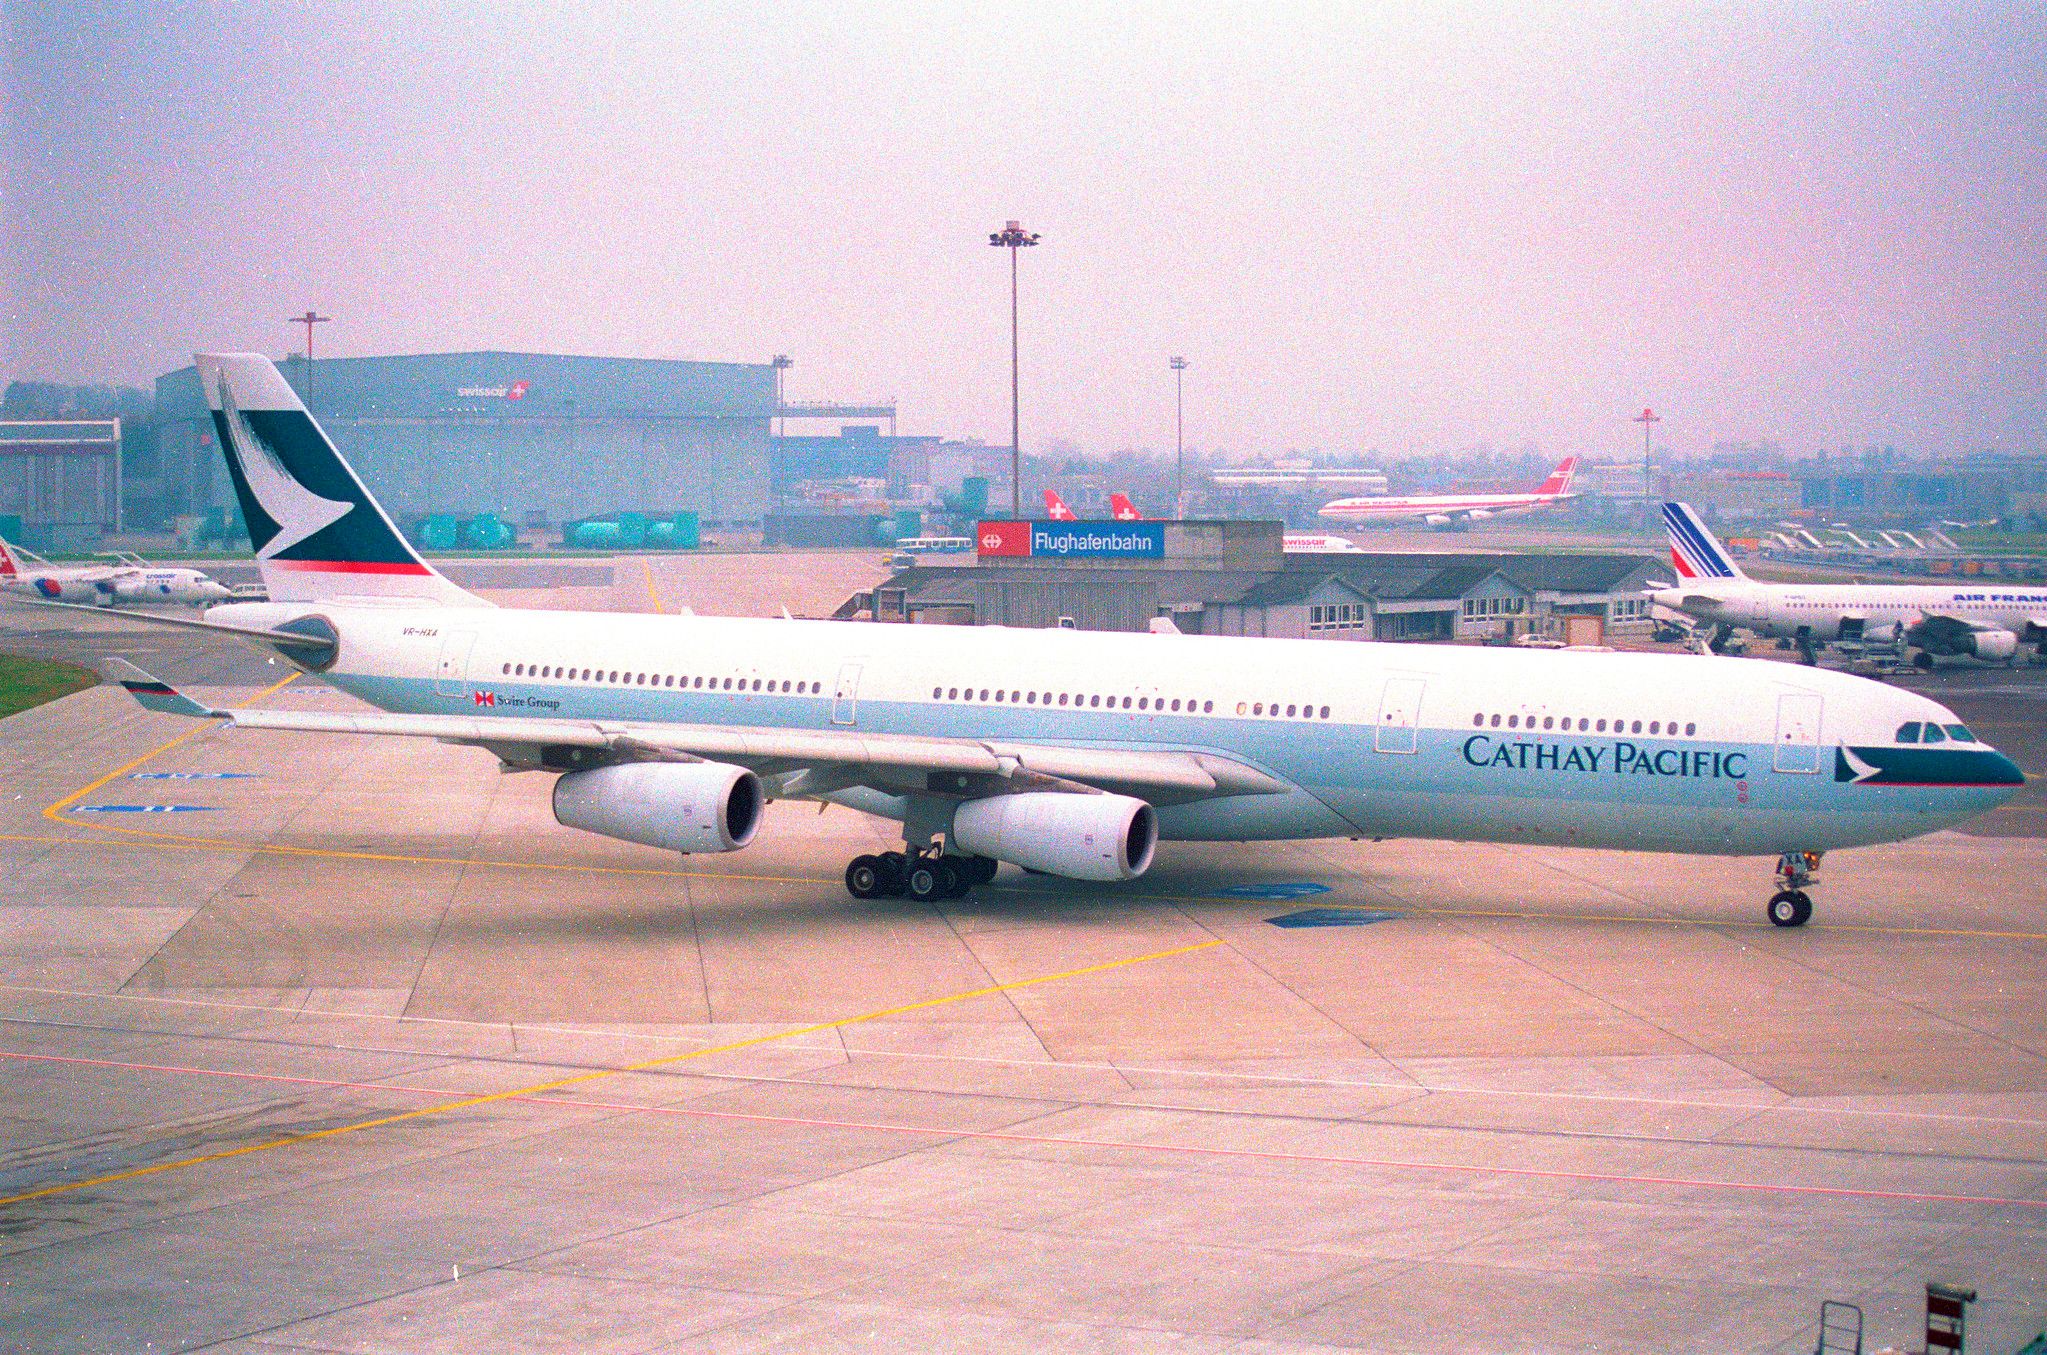 A Cathay Pacific Airbus A340 taxiing to the airport gate.